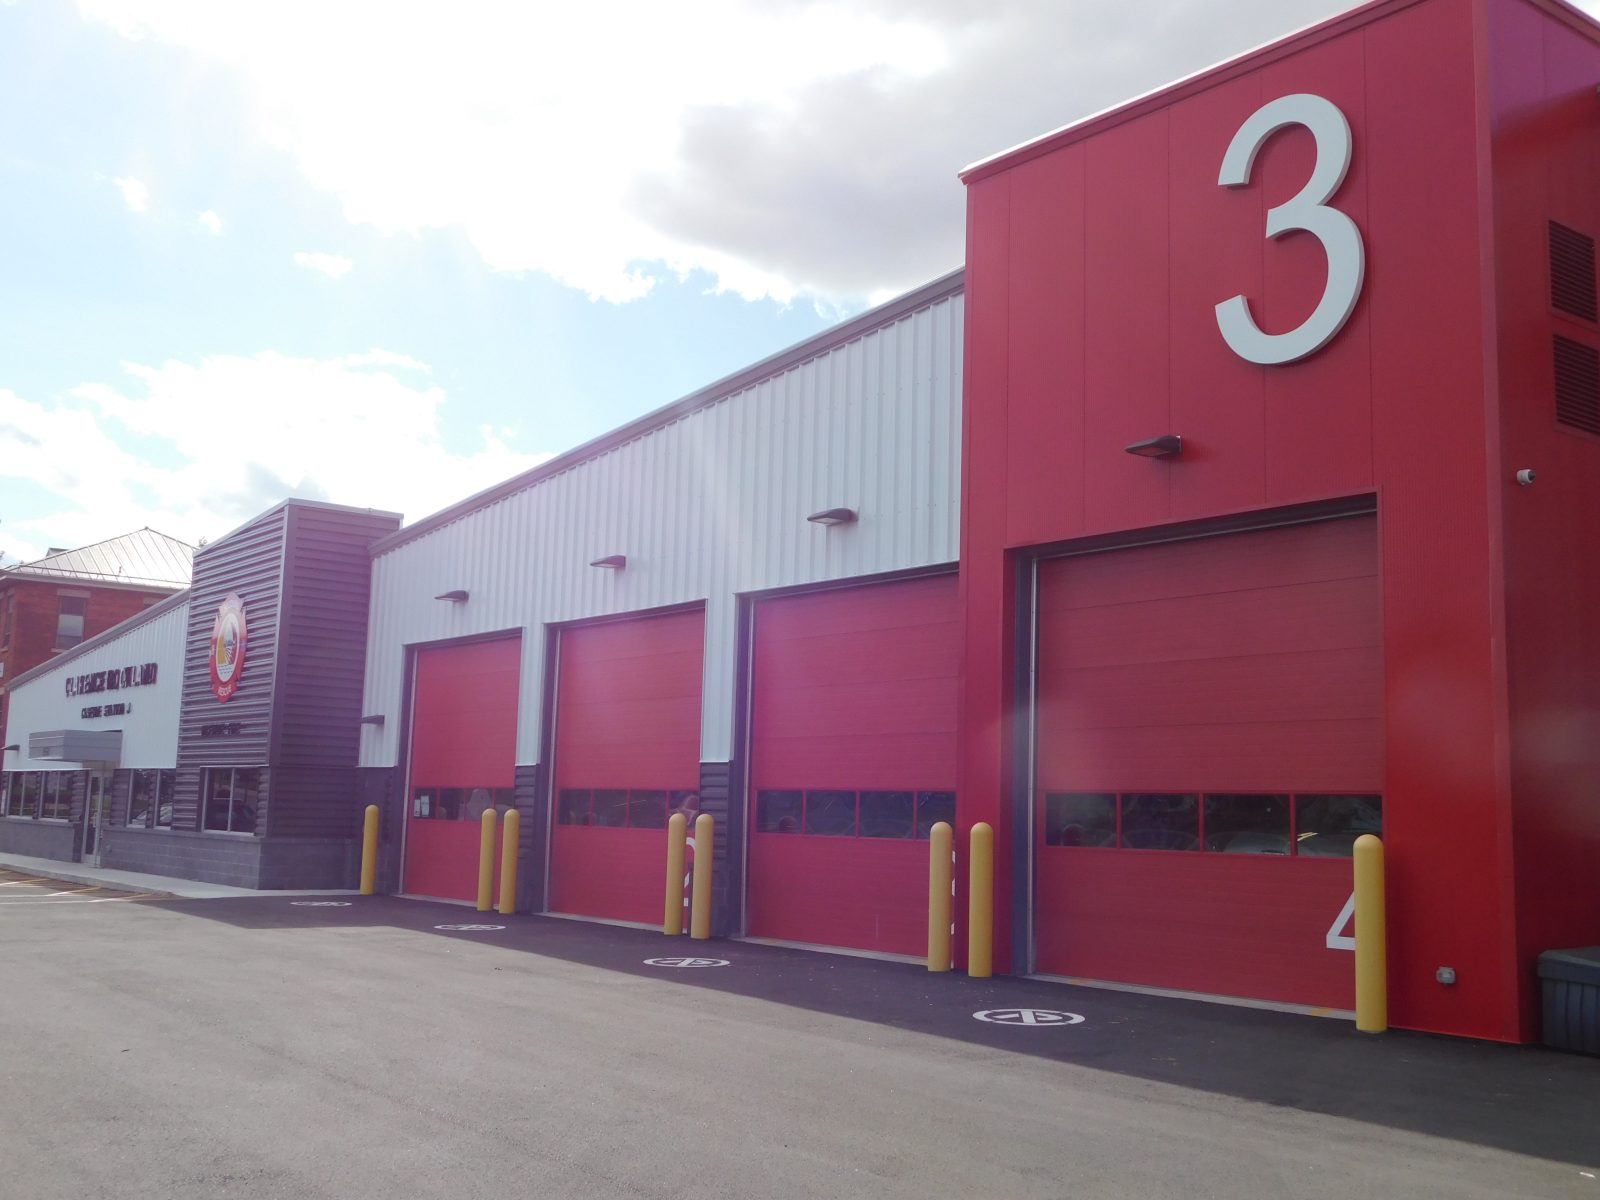 Planning begins for fire training centre